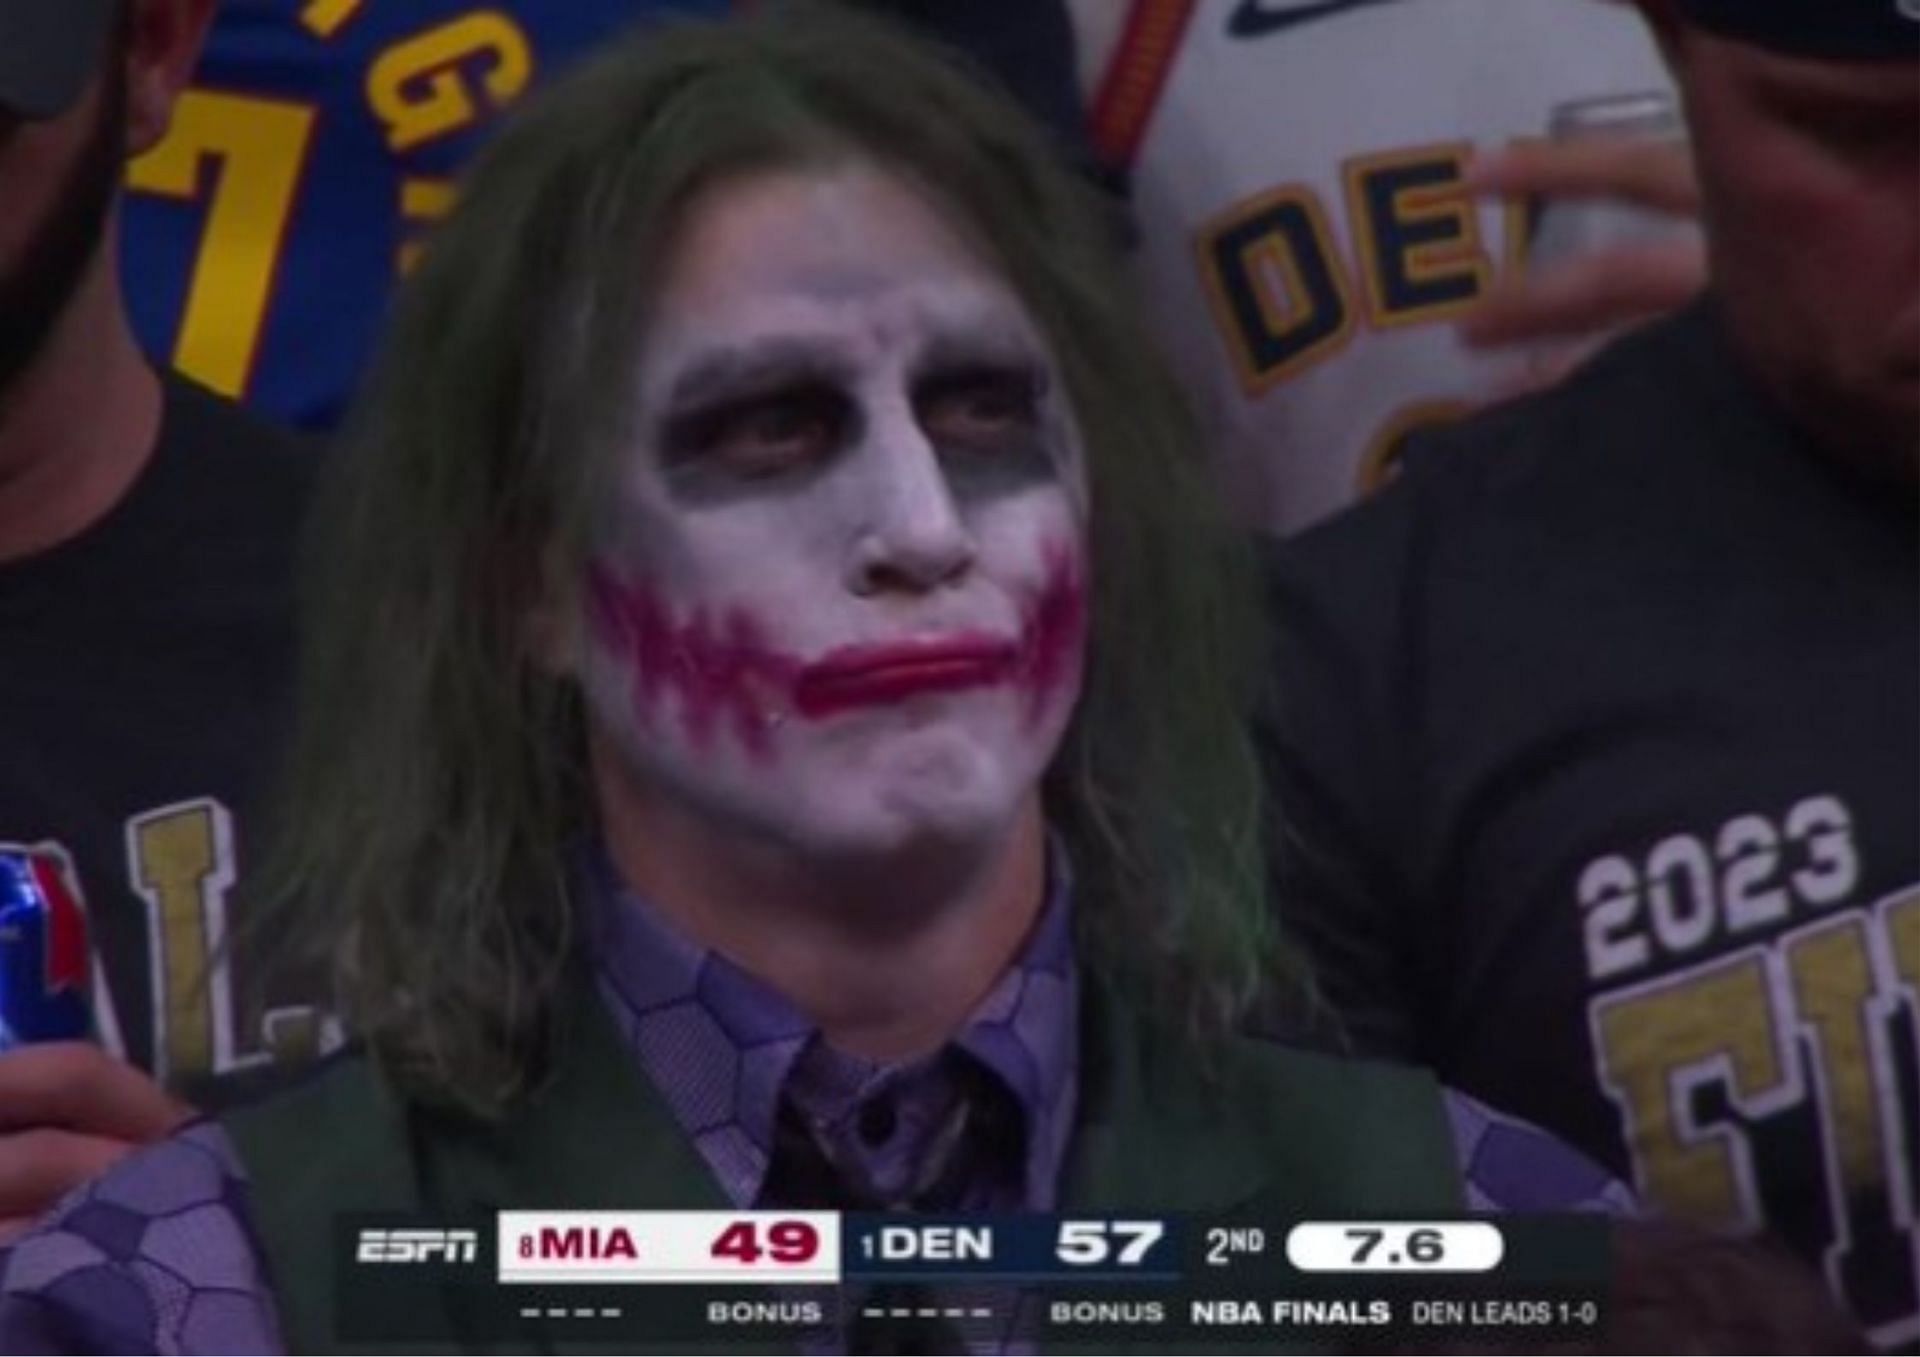 A Denver Nuggets fan dressed as &quot;The Joker&quot; watched his team rally in the first half against the Miami Heat.